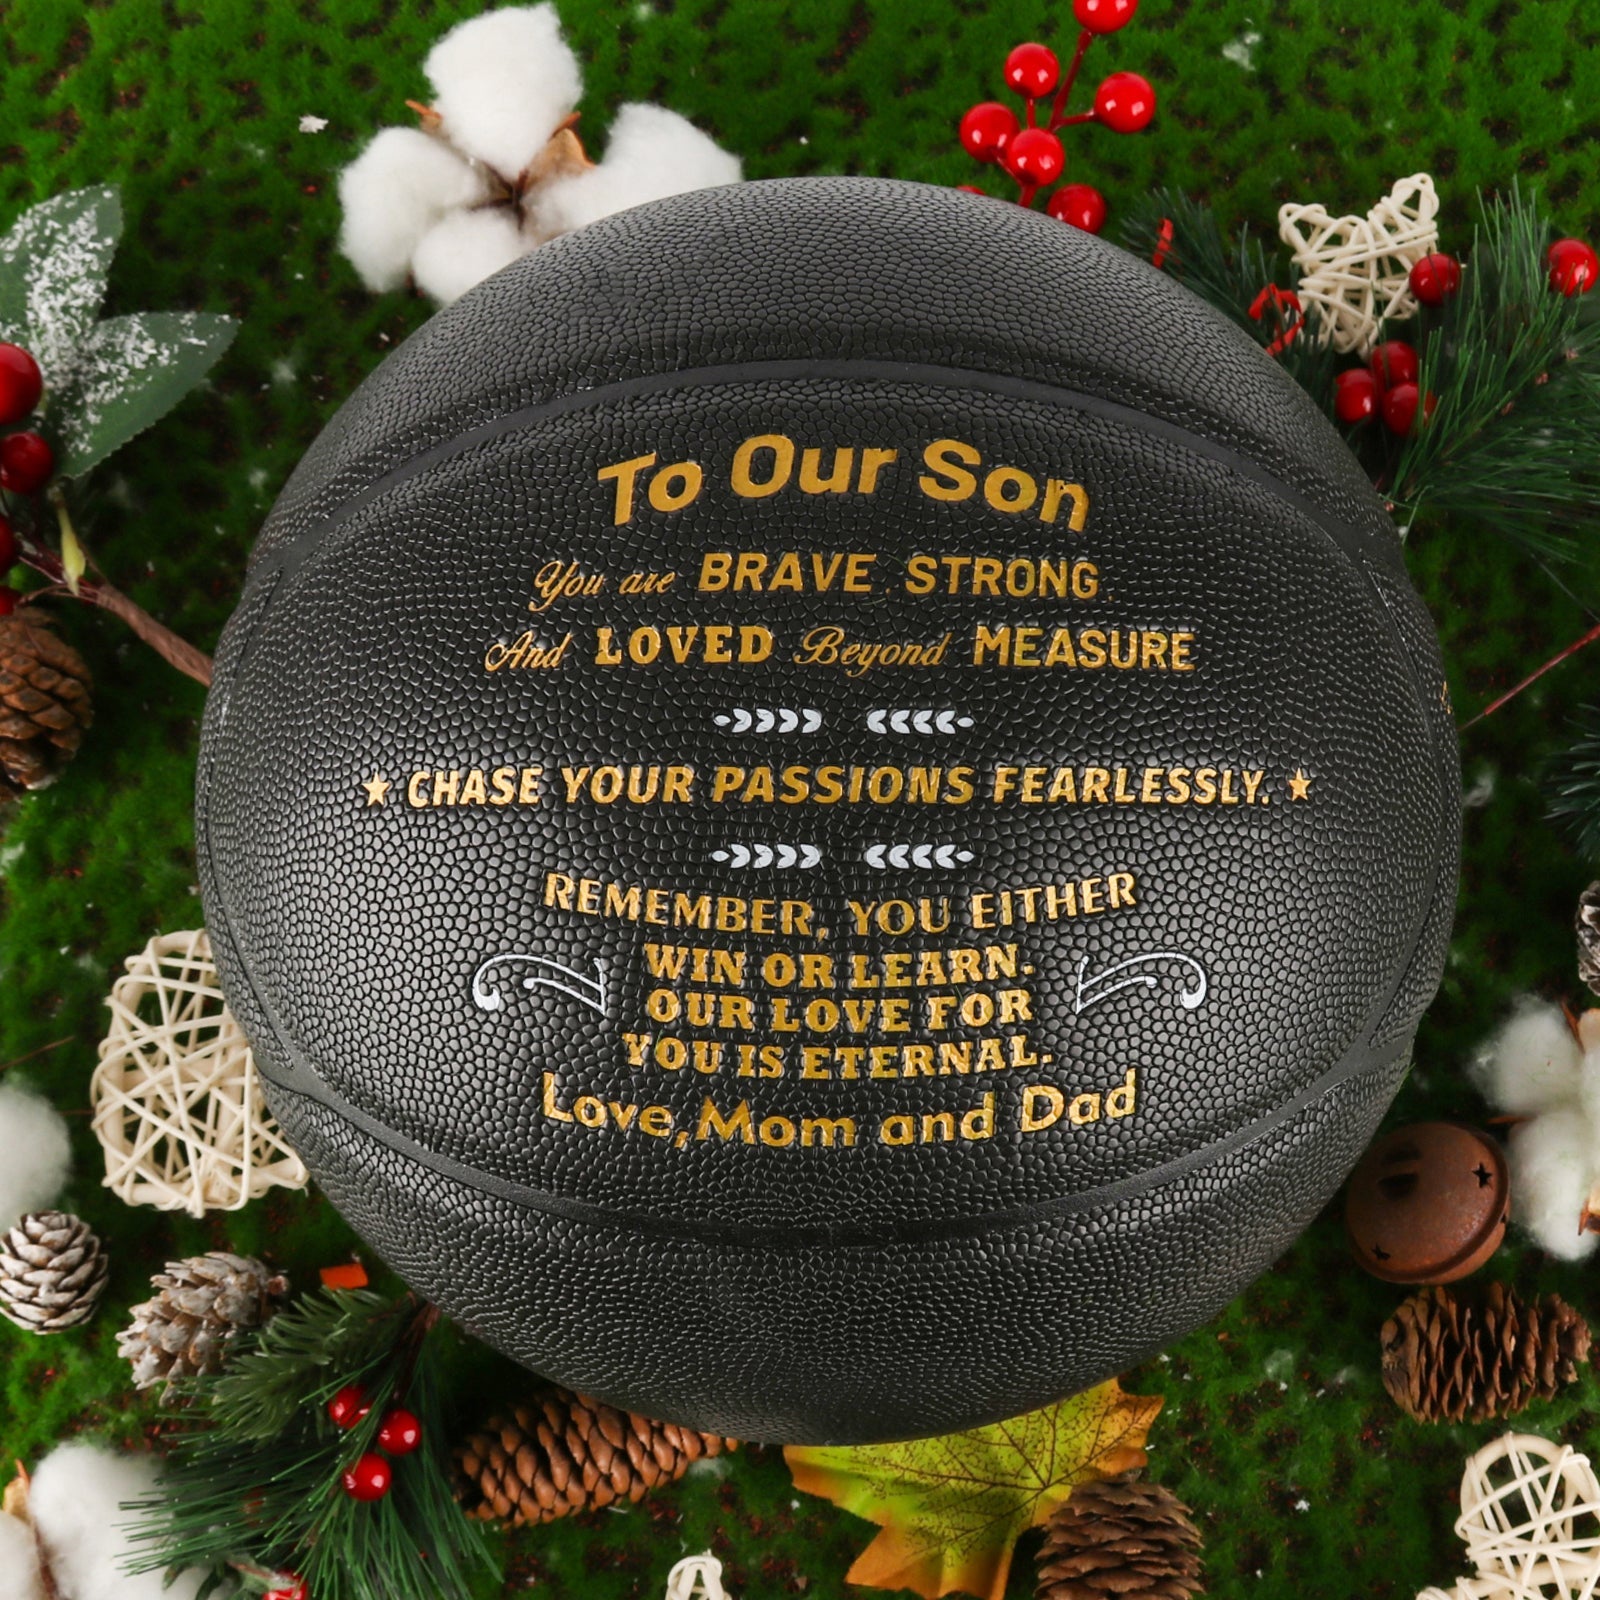 Personalized Letter Basketball For Son, Basketball Indoor/Outdoor Game Ball, Birthday Christmas Gift For Son From Dad And Mom, Black - Family Watchs